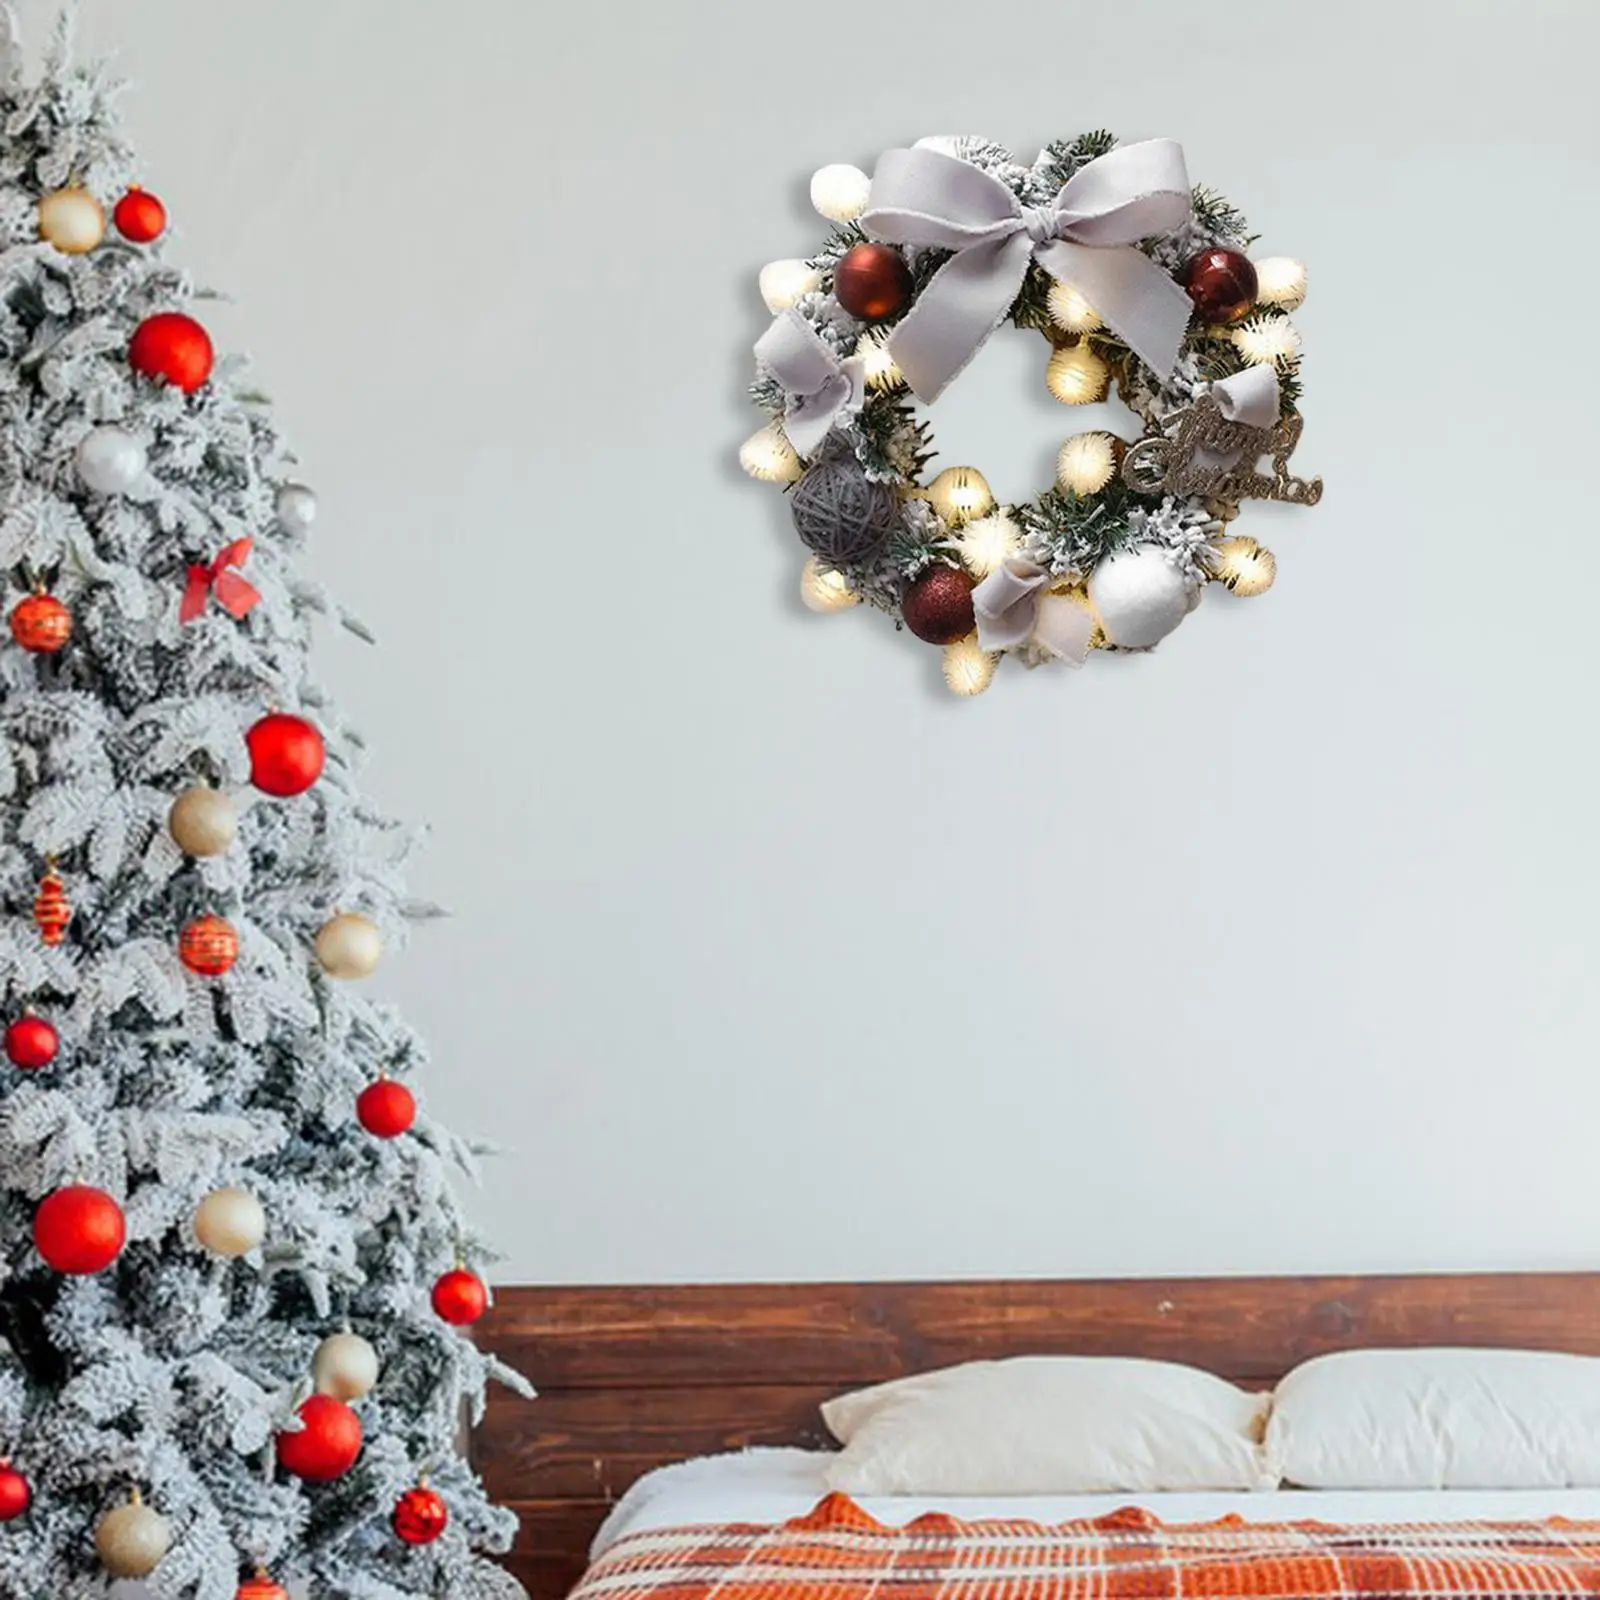 Artificial Christmas Wreath with String Light Holiday Garland for Balcony